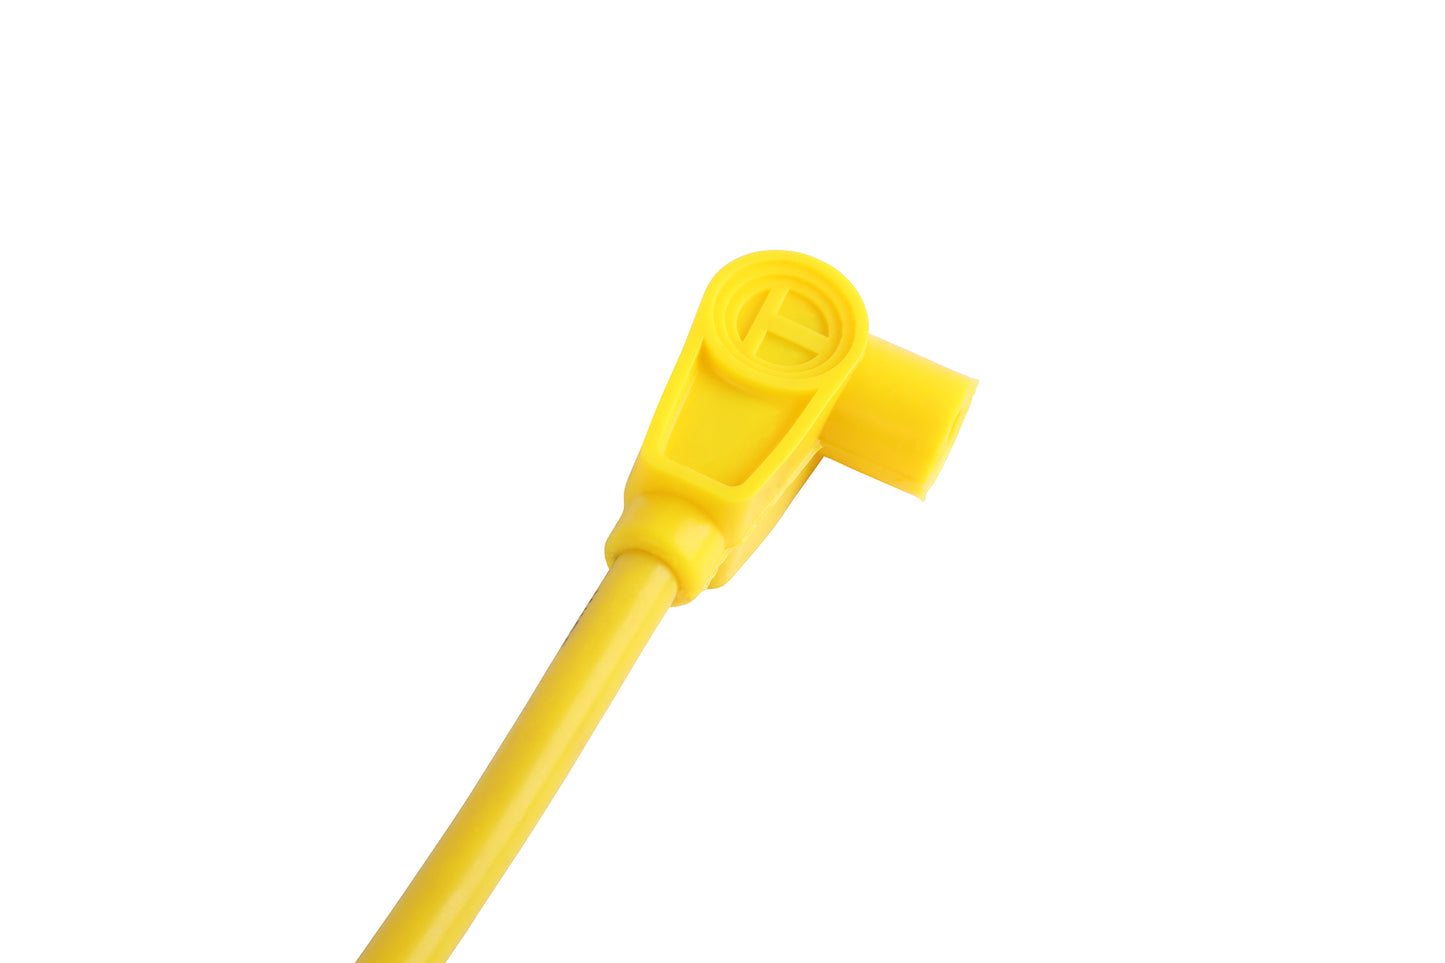 Taylor Cable 73451 8mm Spiro-Pro univ 8 cyl 90 Yellow